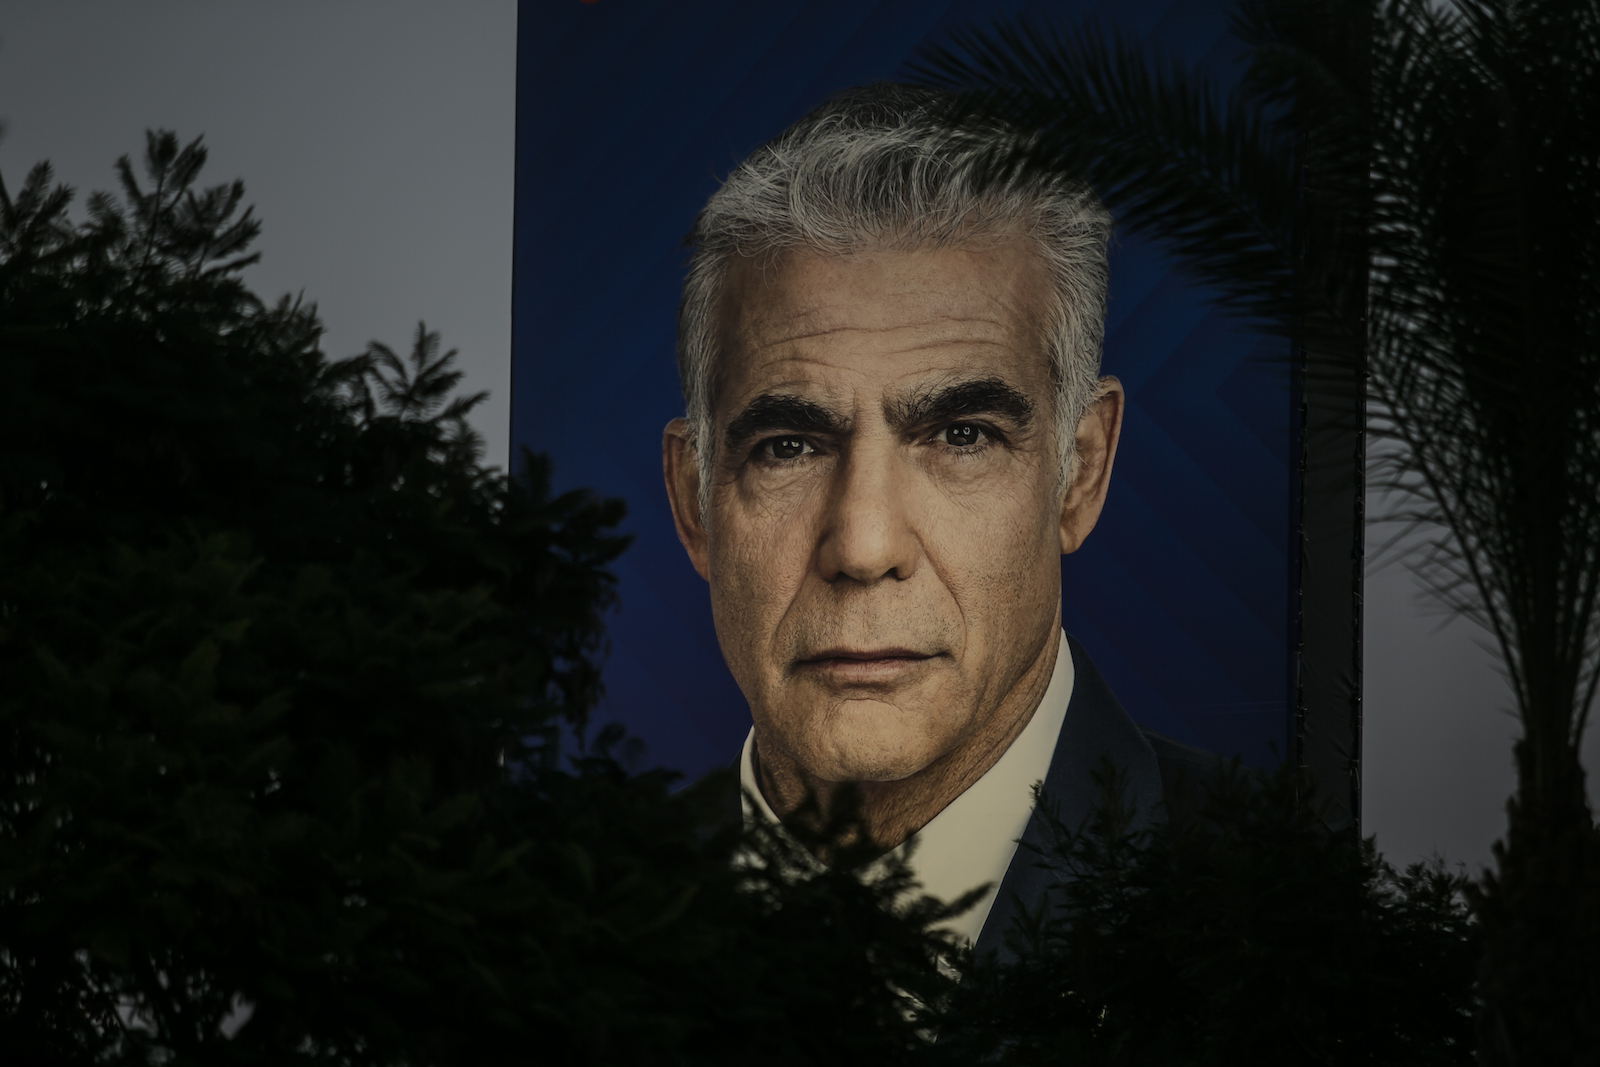 A billboard of a man's face, with gloomy trees in the foreground